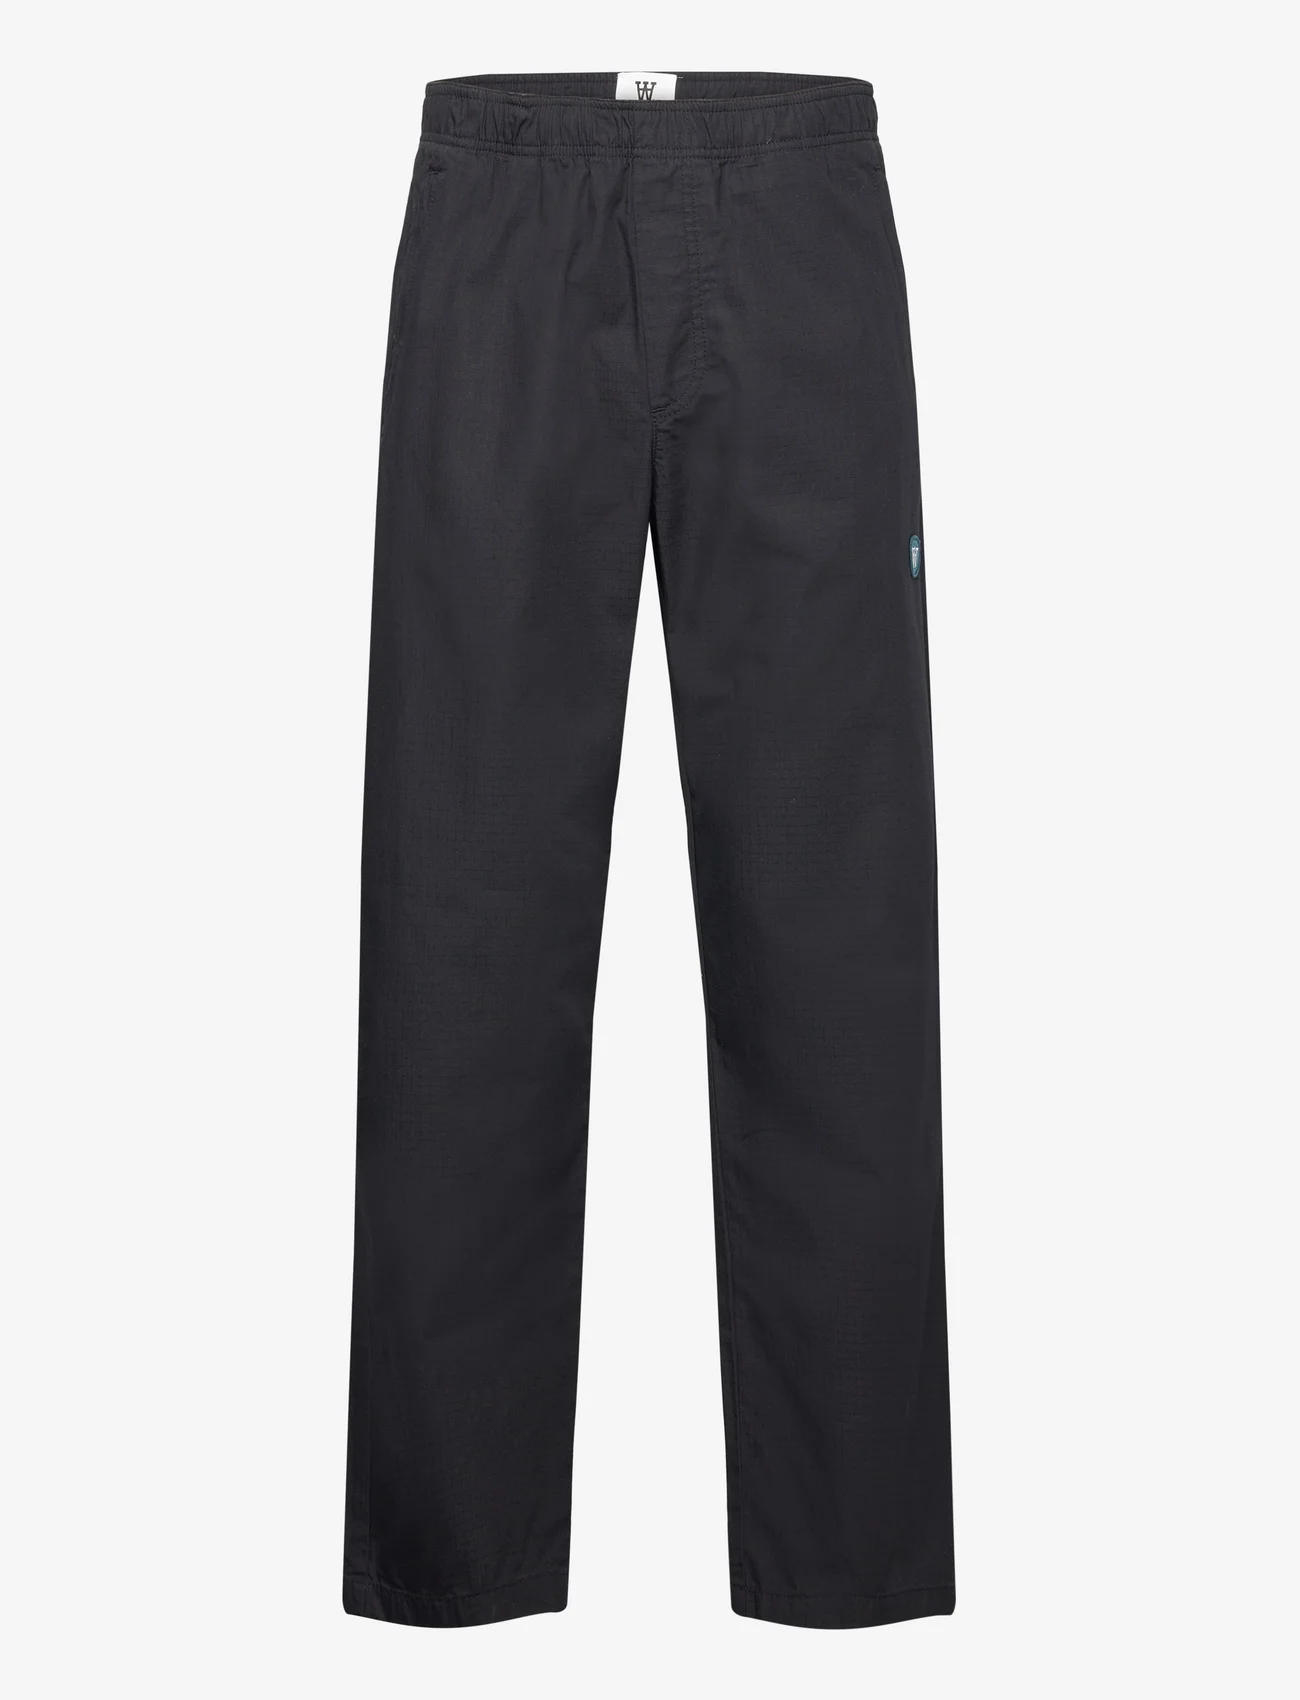 Double A by Wood Wood - Lee ripstop trousers - casual trousers - black - 0